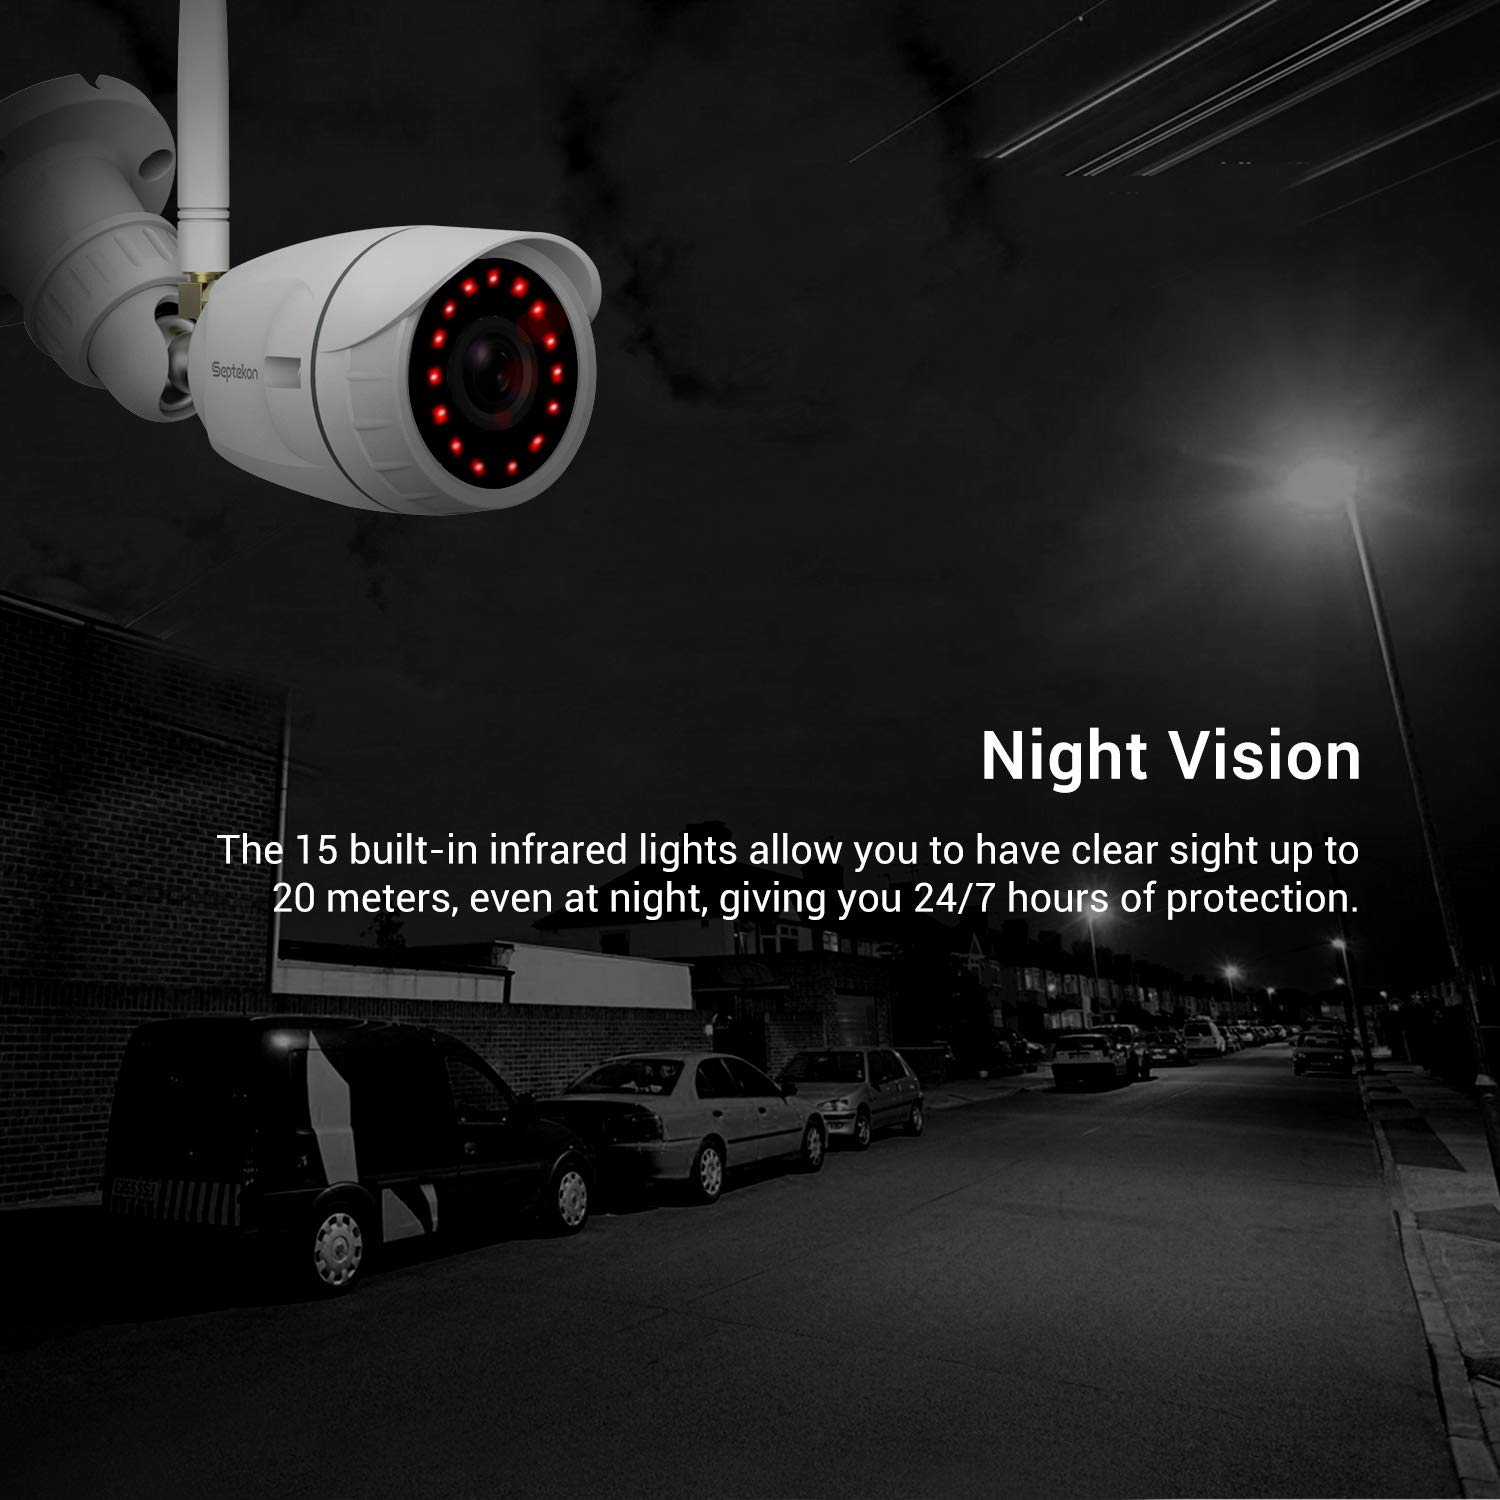 Outdoor Security Camera, Septekon 1080P Home Wireless WiFi Surveillance CCTV Camera with IP66 Waterproof, Night Vision, Motion Detection, Remote Access, Compatible with Alexa-S40